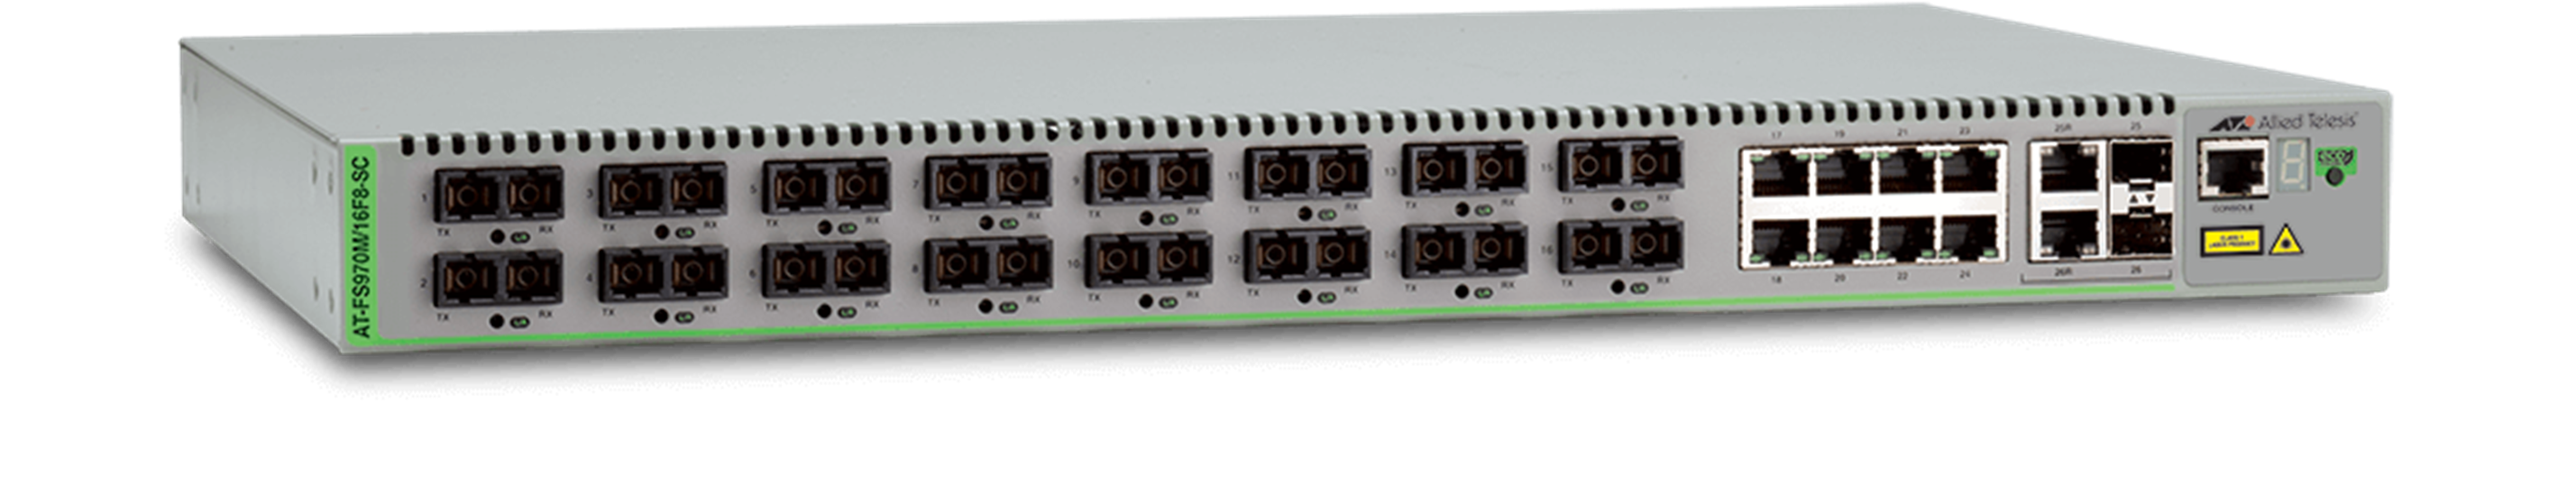 AT-FS970M Series - Layer 2 Fast Ethernet Switch